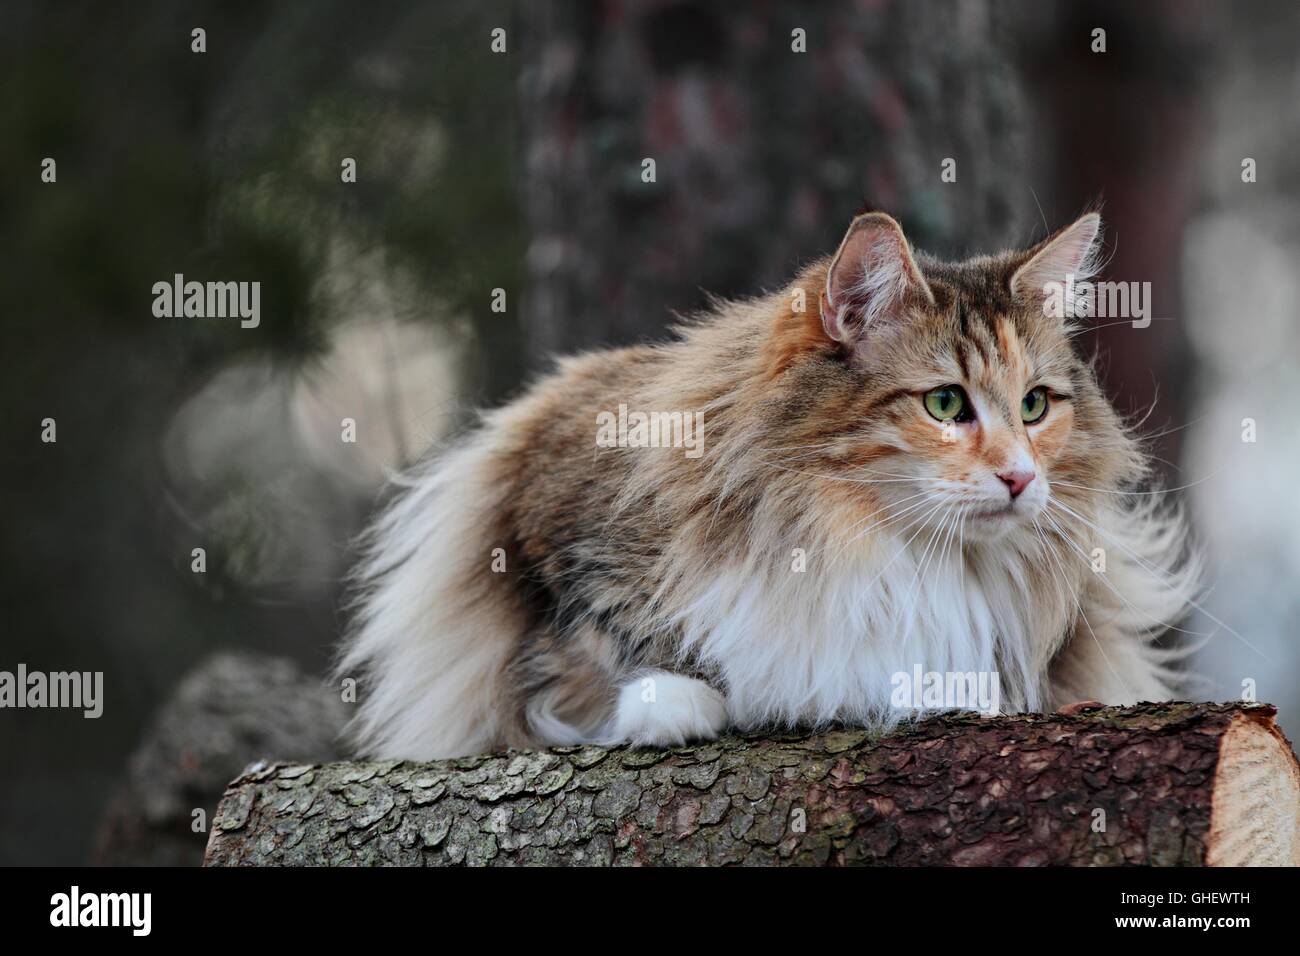 Norwegian forest cat with alert expression Stock Photo